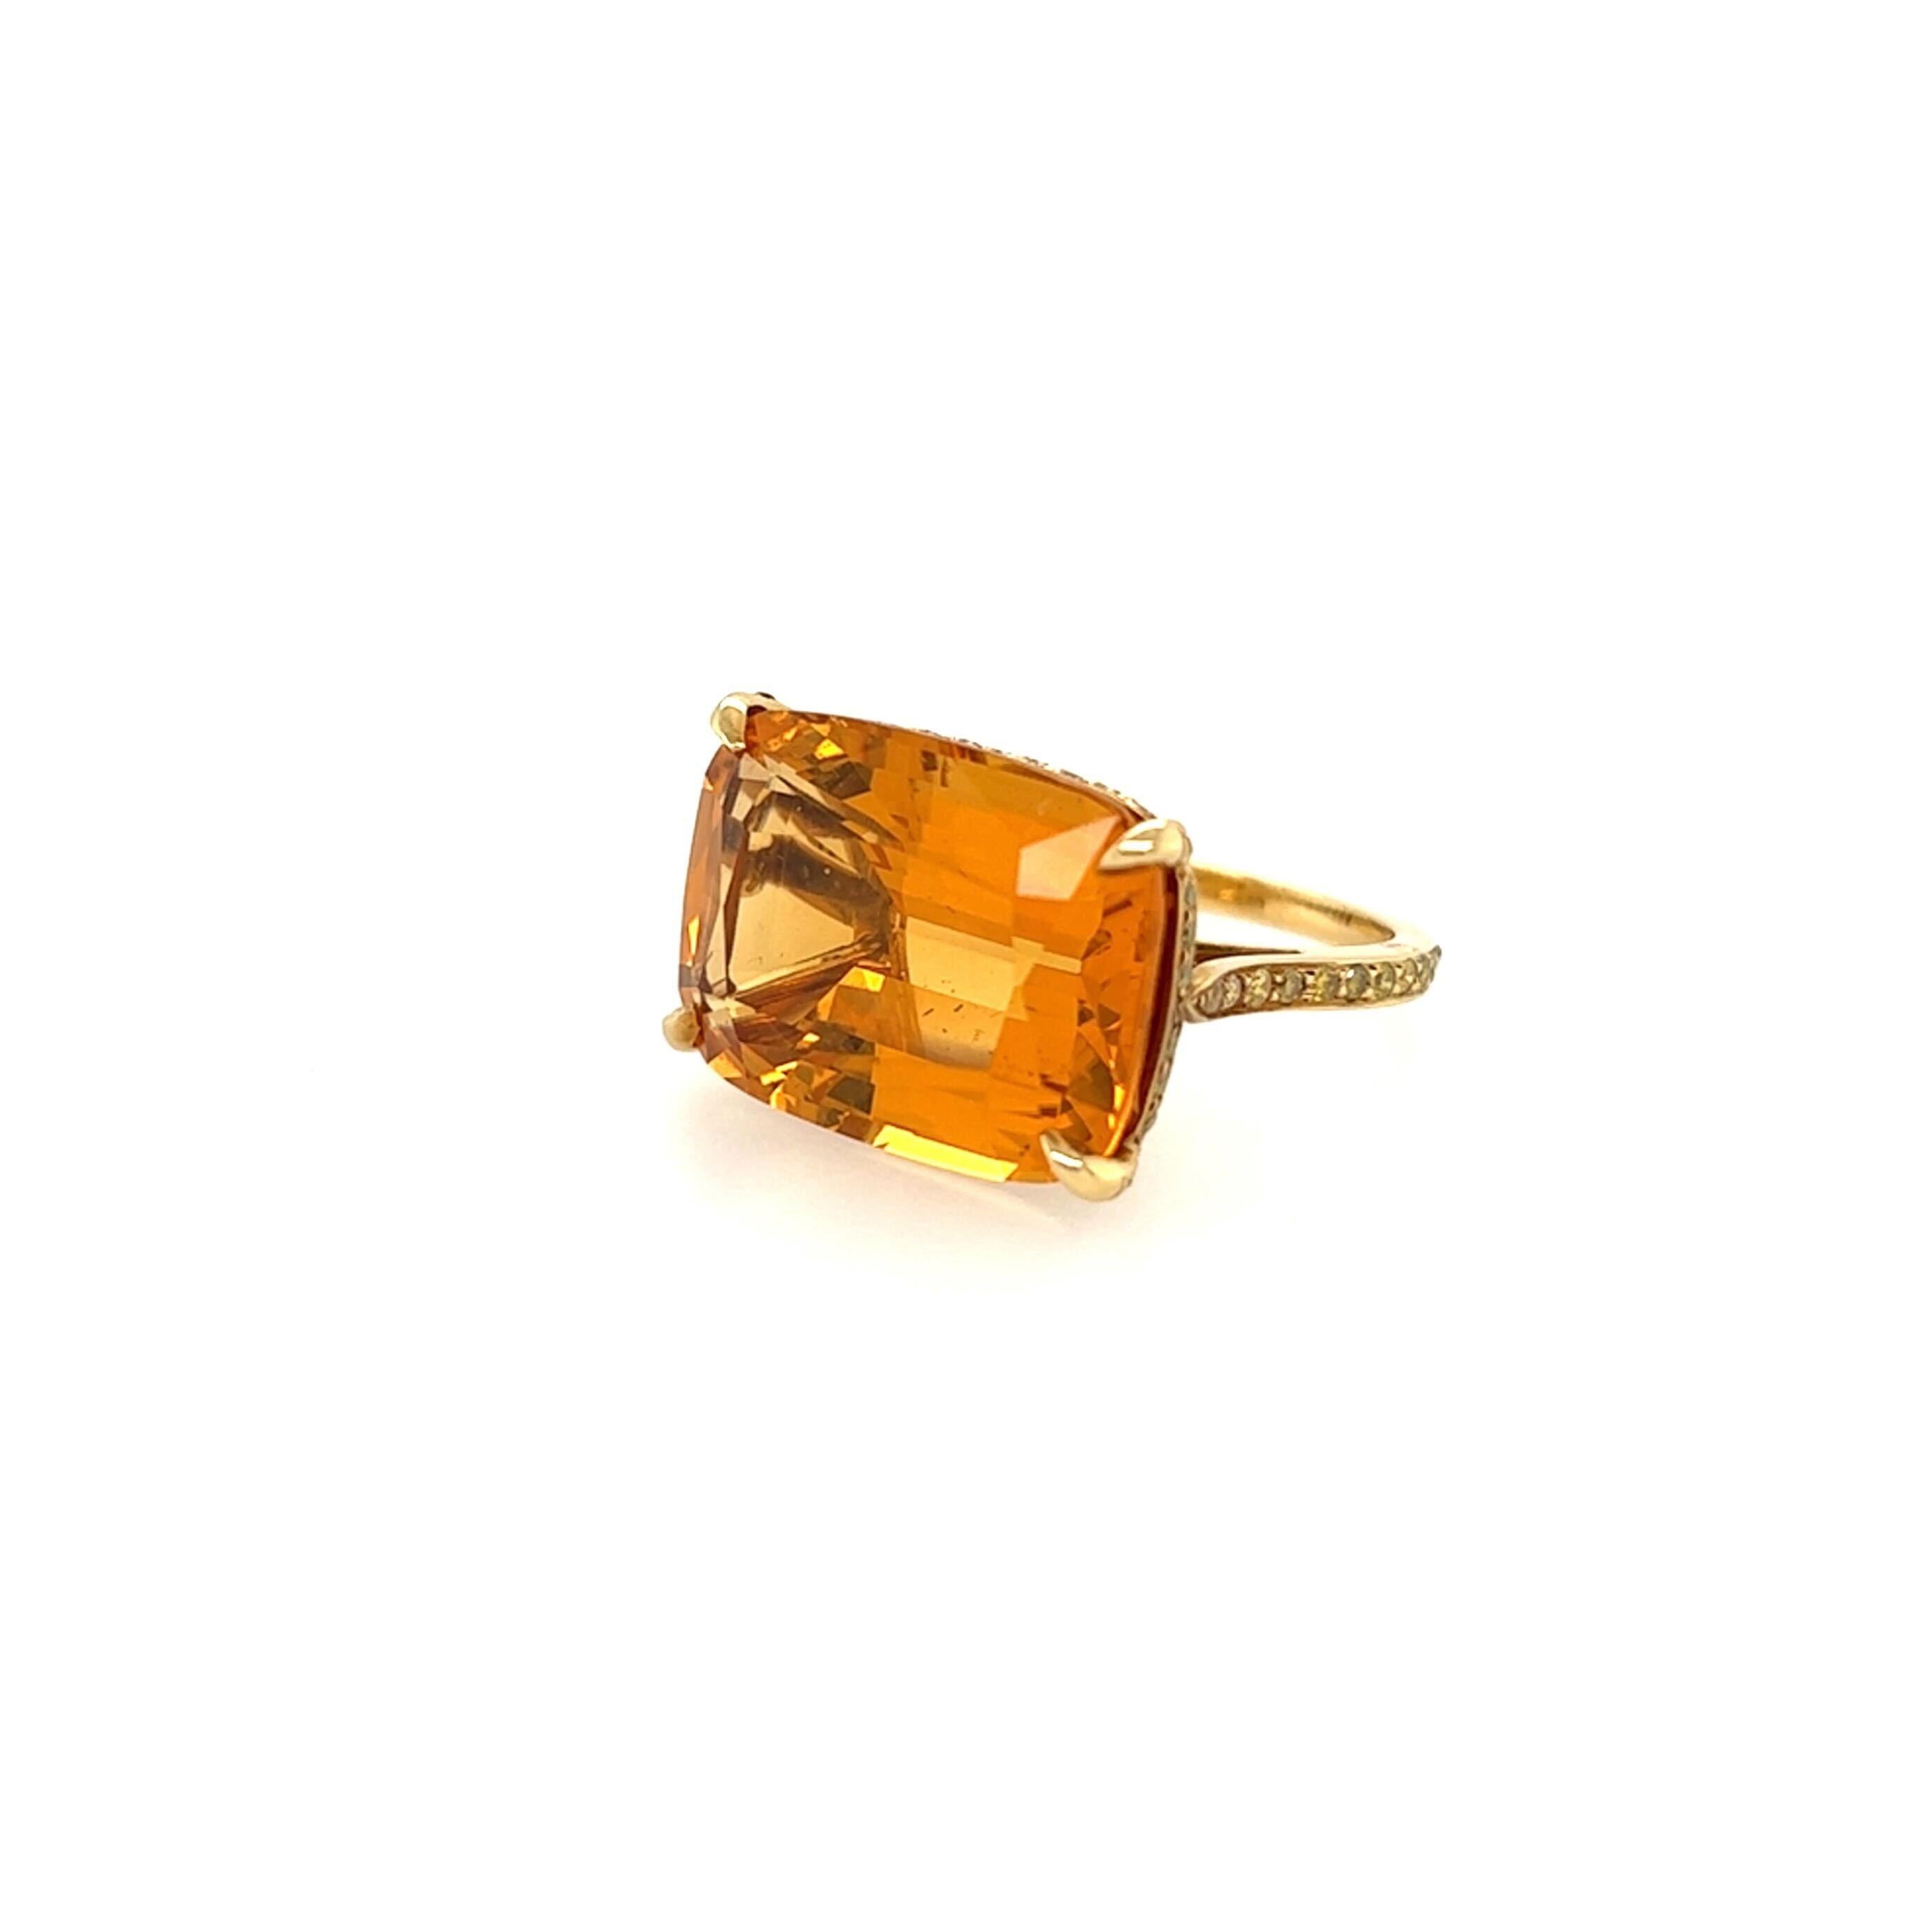 An 18 karat yellow gold, citrine and yellow diamond ring. Paolo Costagli. horizontally set with a cushion cut citrine, measuring approximately 18.0 x 13.3mm, with pave set yellow diamond gallery and shank. Size 4 1/2, gross weight is approximately